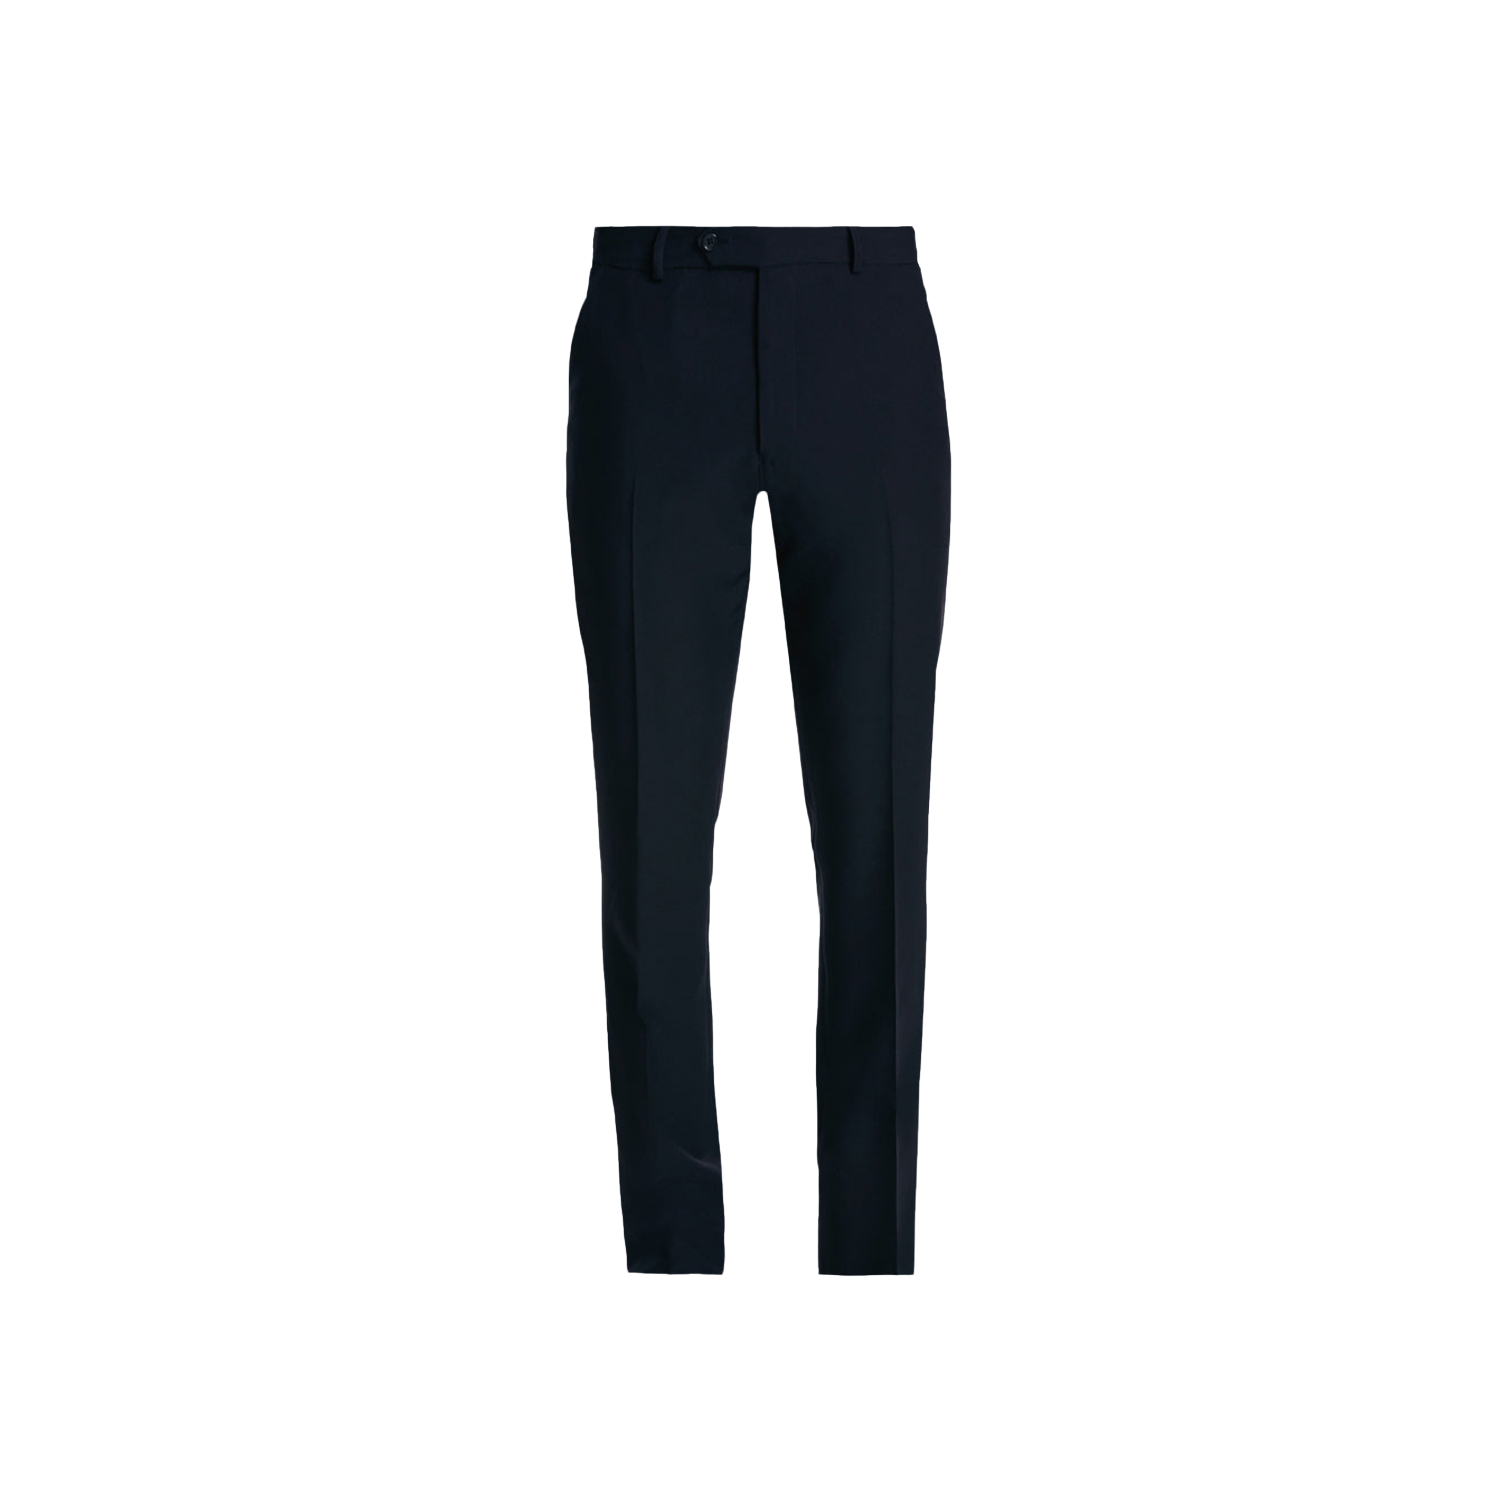 NNT Men's Helix Dry Flat Front Pants - Navy - Totally Workwear